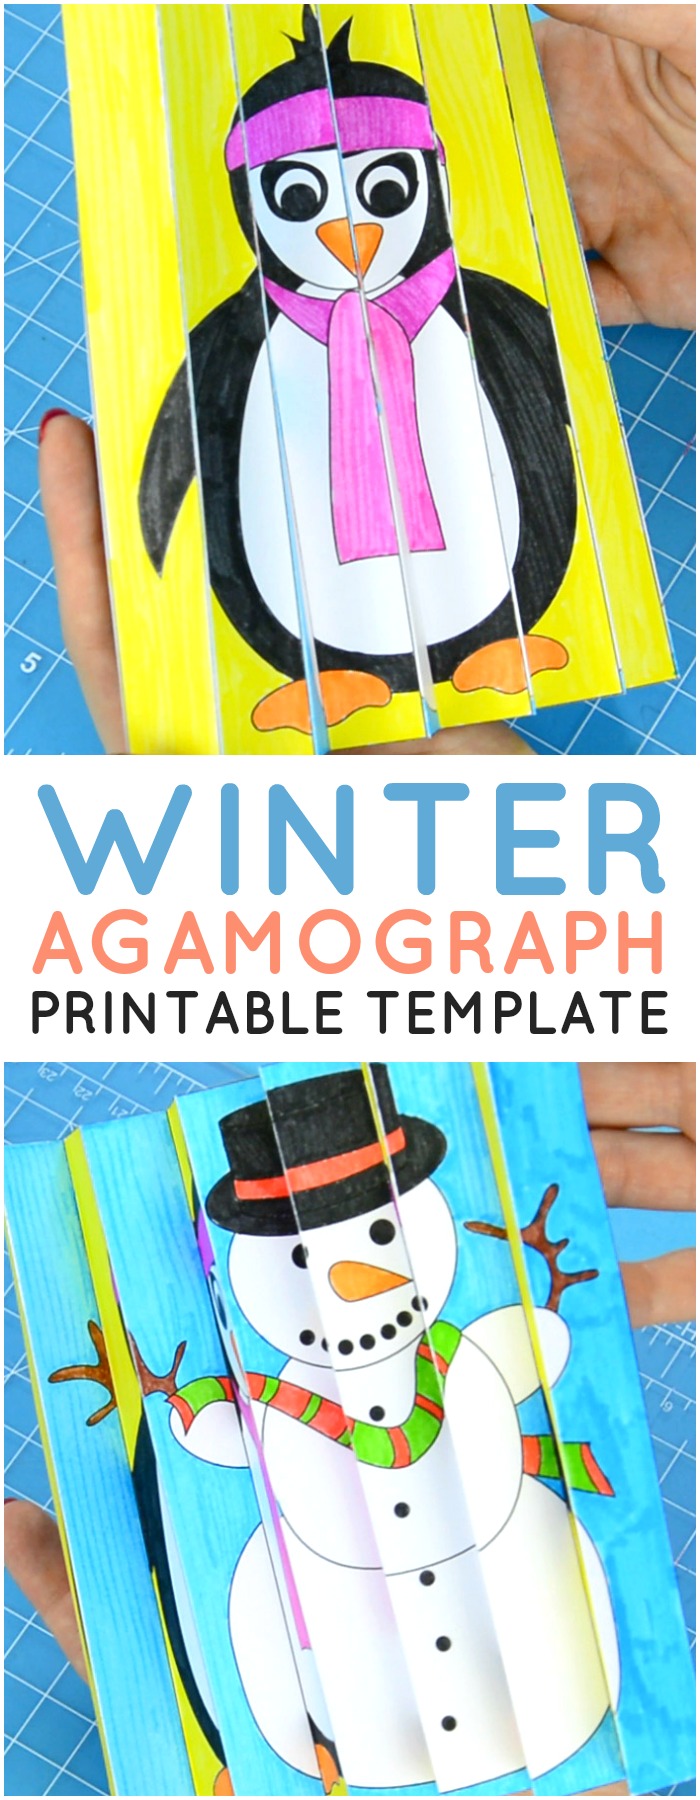 Printable winter agamograph template for kids to make.  Super fun winter crafts for kids to have lots of fun.